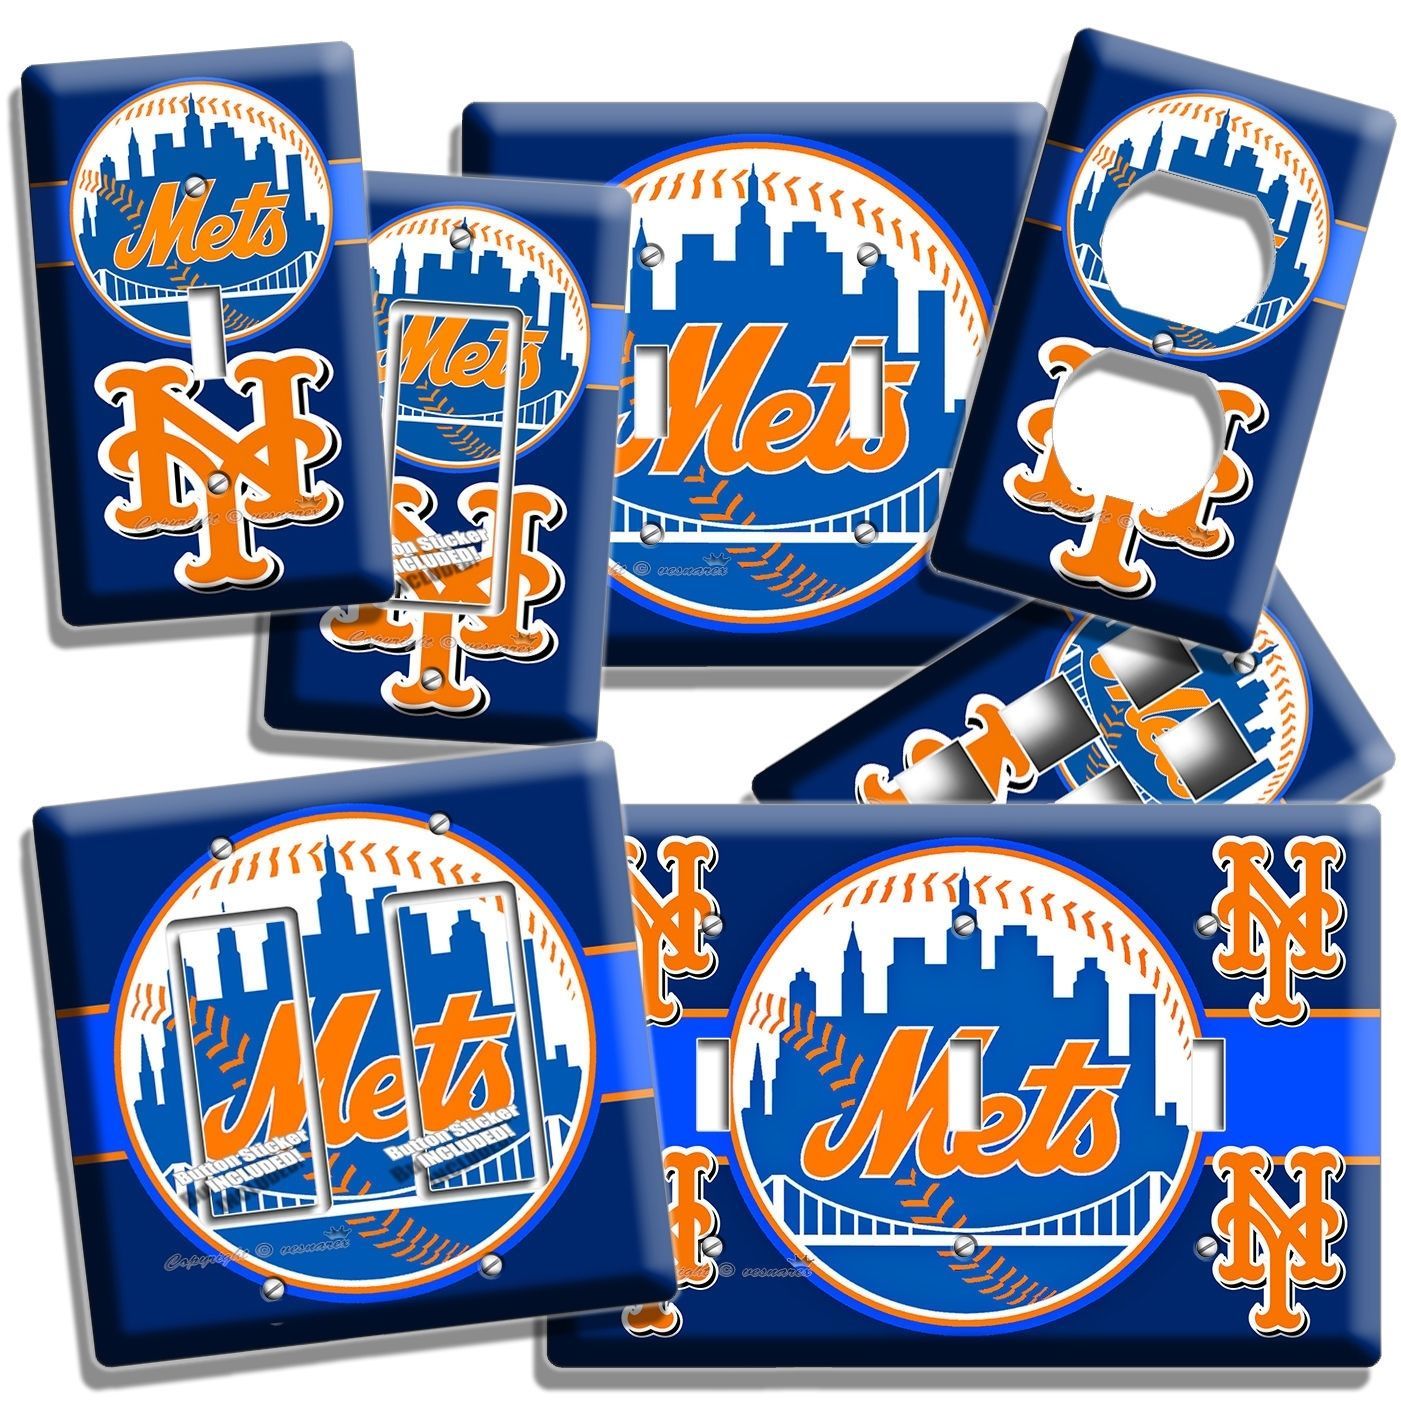 NEW YORK METS BASEBALL TEAM LIGHT SWITCH OUTLET WALL PLATE COVER MAN CAVE DECOR